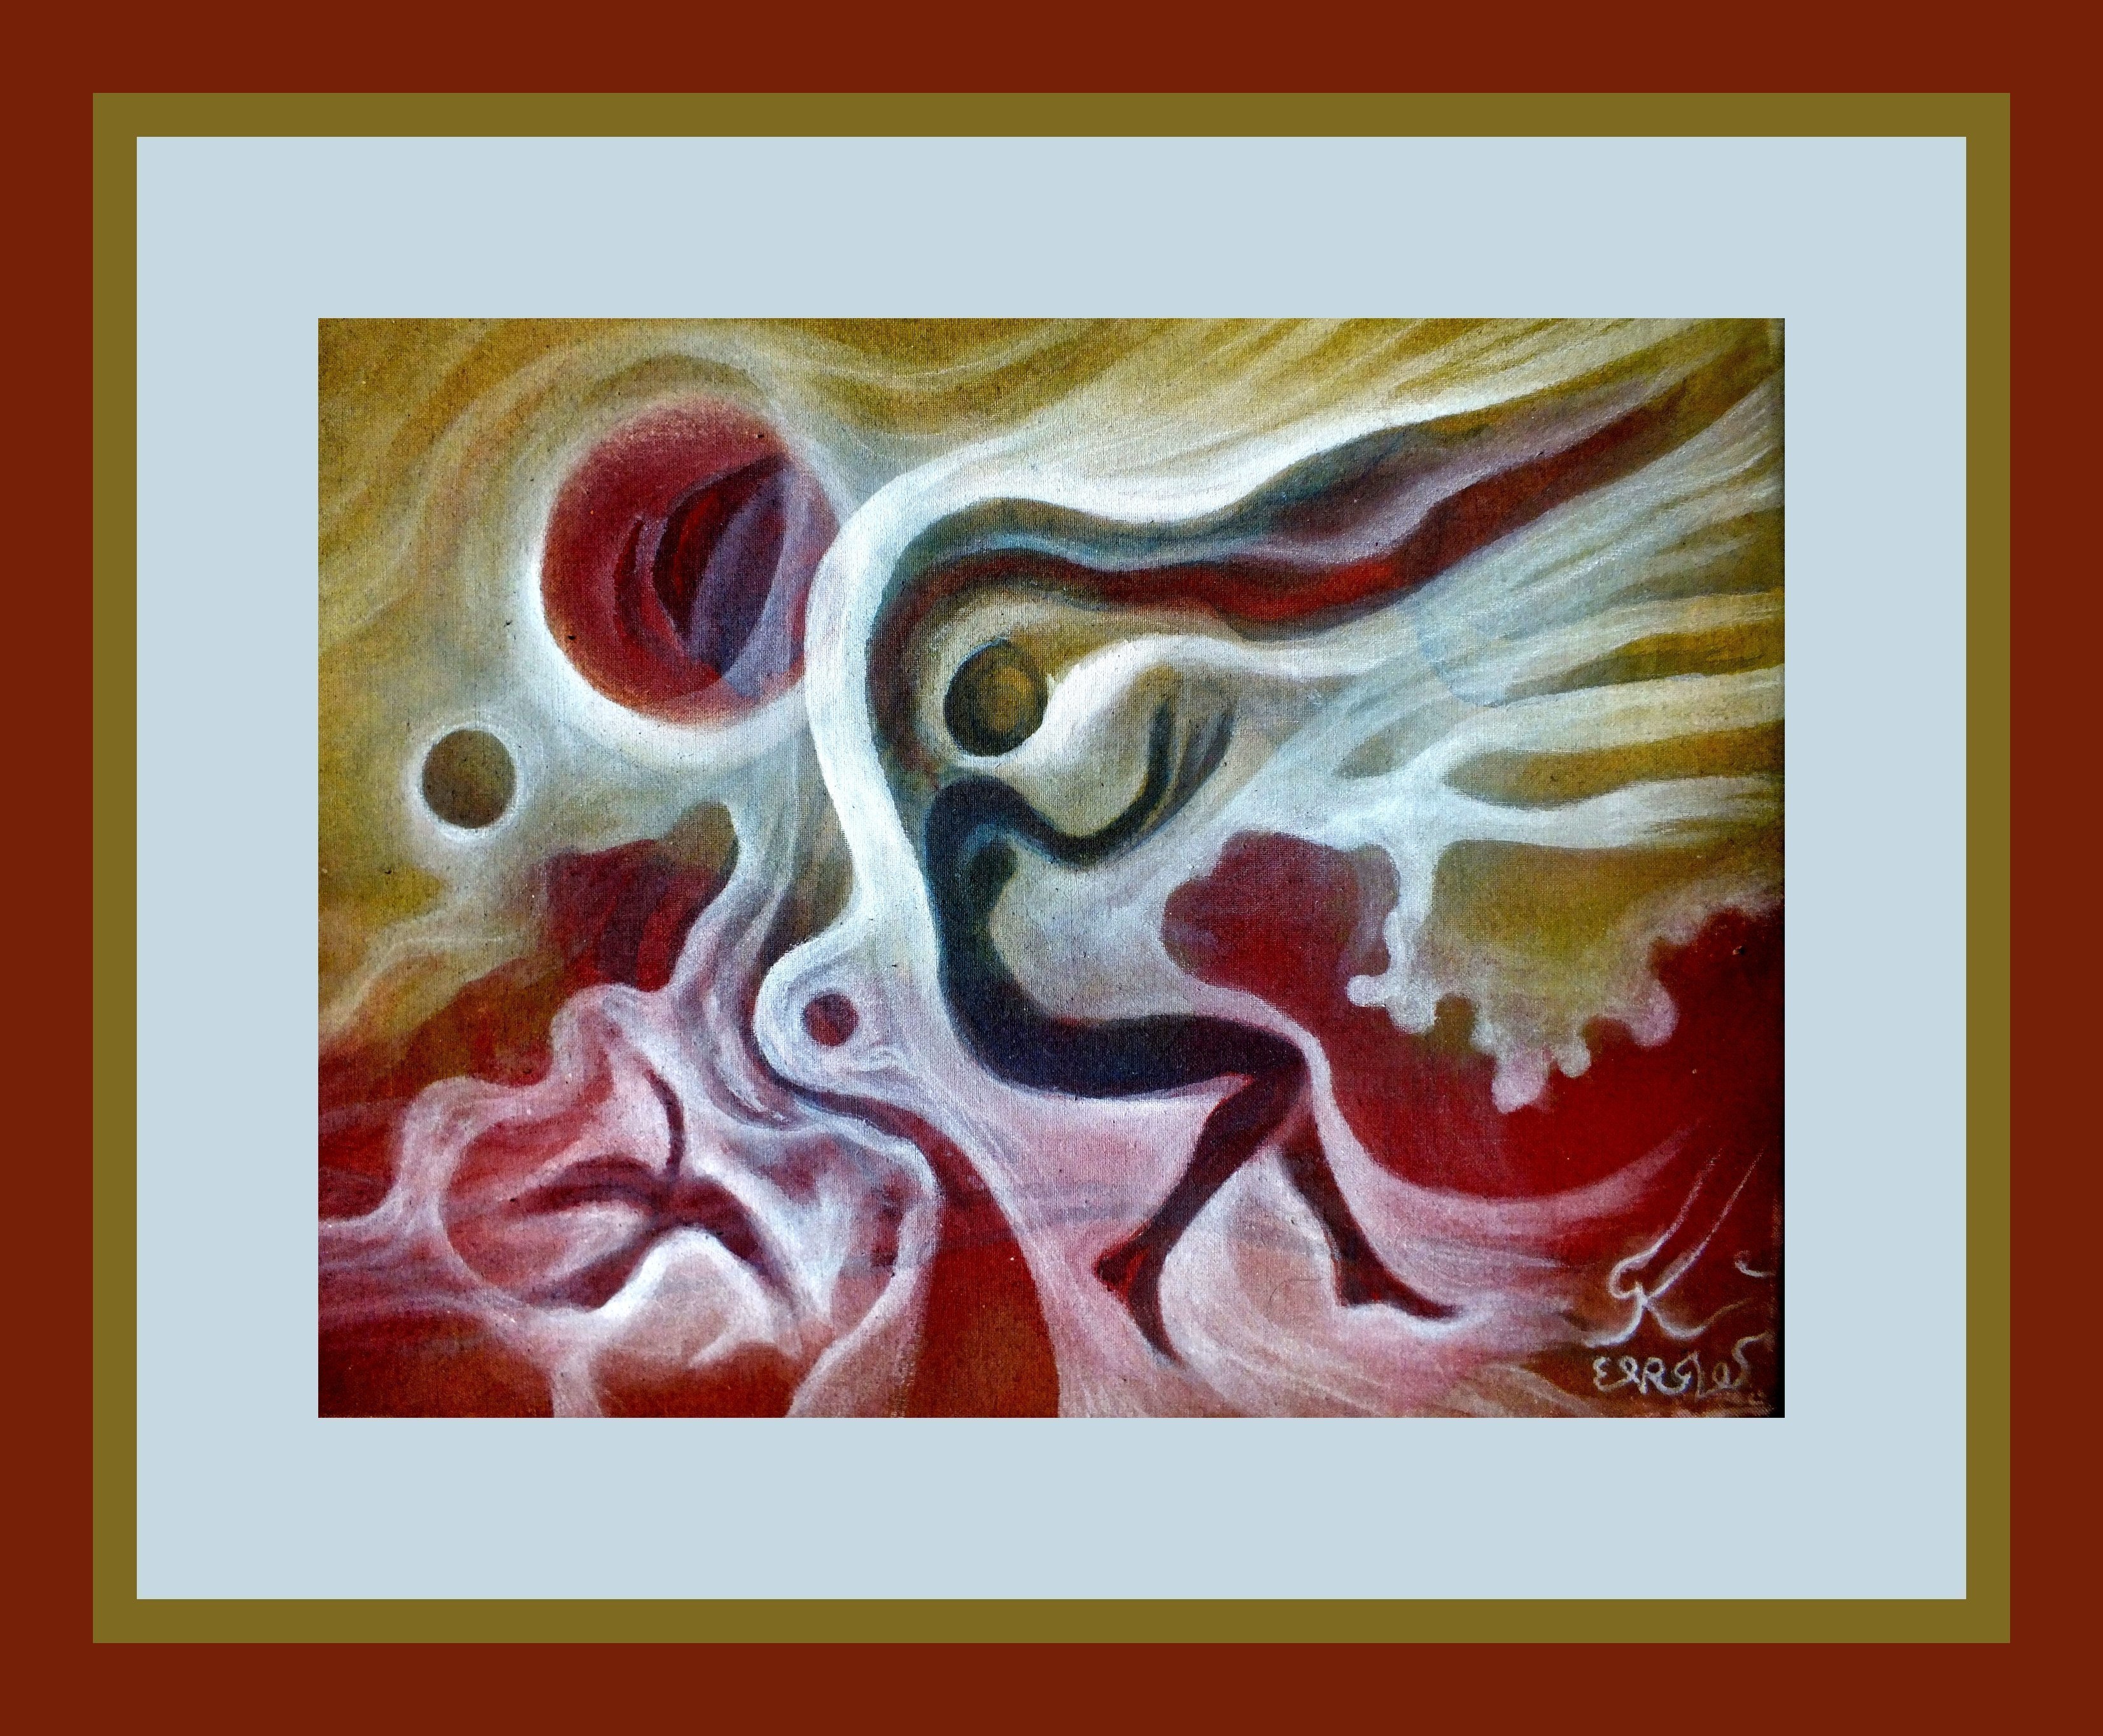 George Katevenis; Virgo Wind, 2020, Original Mixed Media, 35 x 25 cm. Artwork description: 241 EARLY IN THE MORNING WHEN THE WIND IS MIXED WITH THE AWAKENING EARTH THE MIND FACES THE FORM ANEW.  mix mediaon CANVAS ...